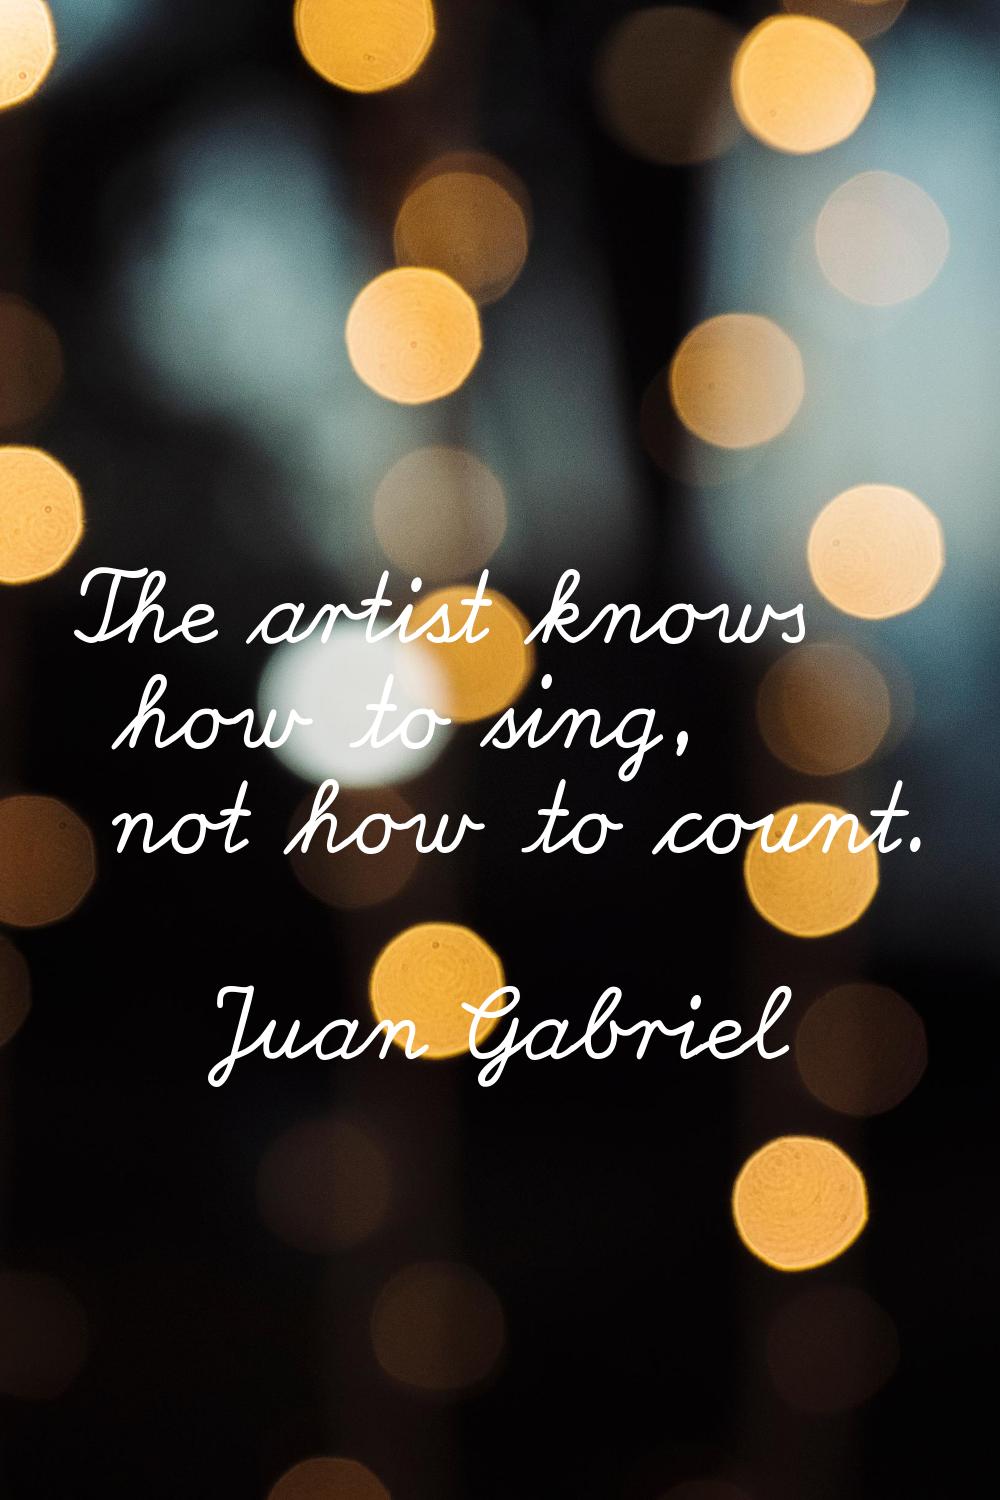 The artist knows how to sing, not how to count.